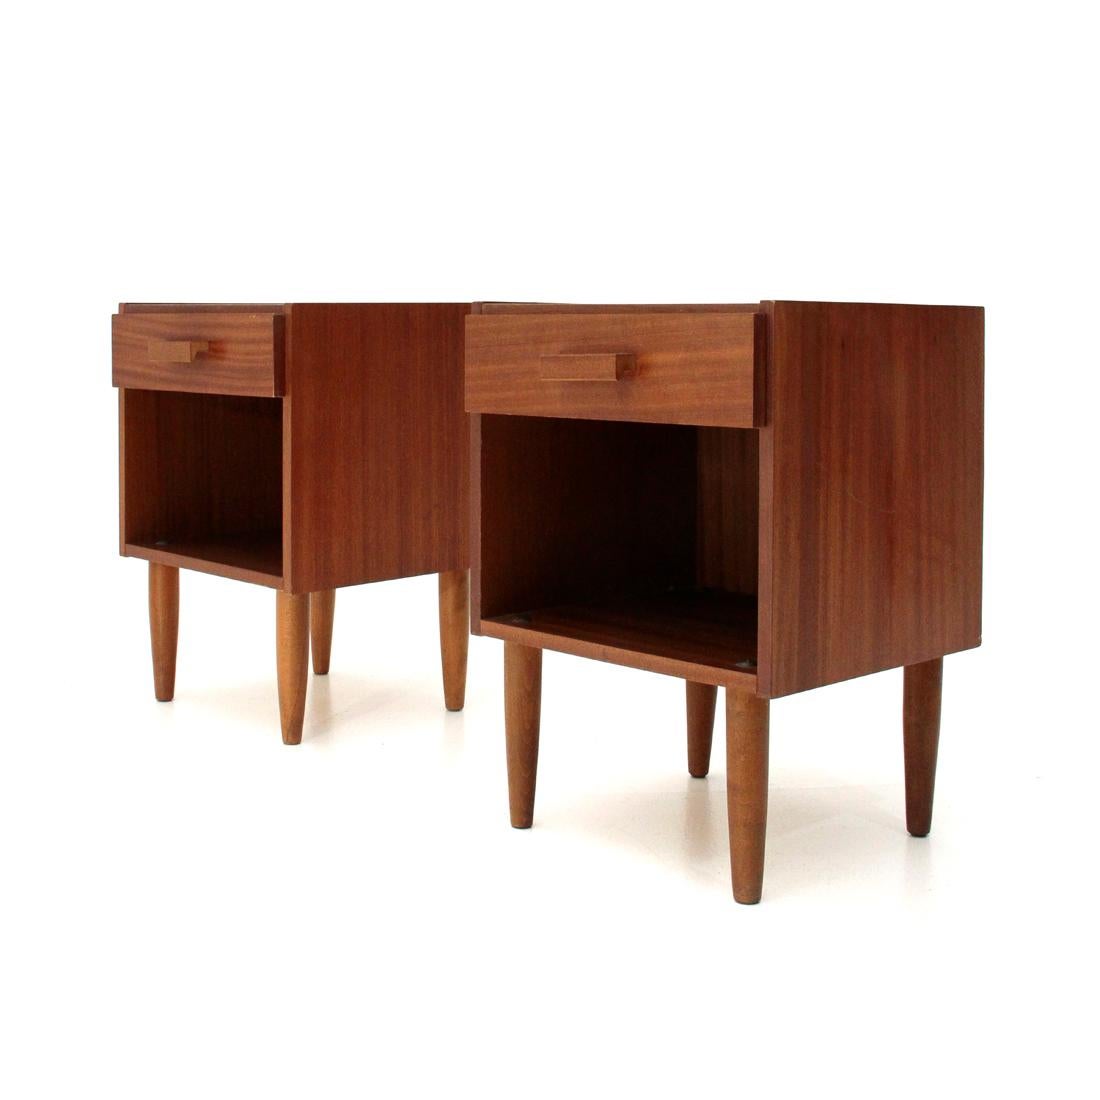 Pair of bedside tables of Italian manufacture produced in the 1960s.
Teak veneered wood structure.
Drawer with teak veneered front and teak handle.
Teak legs, tapered conical shape, brass screws.
Good general conditions, some signs and small